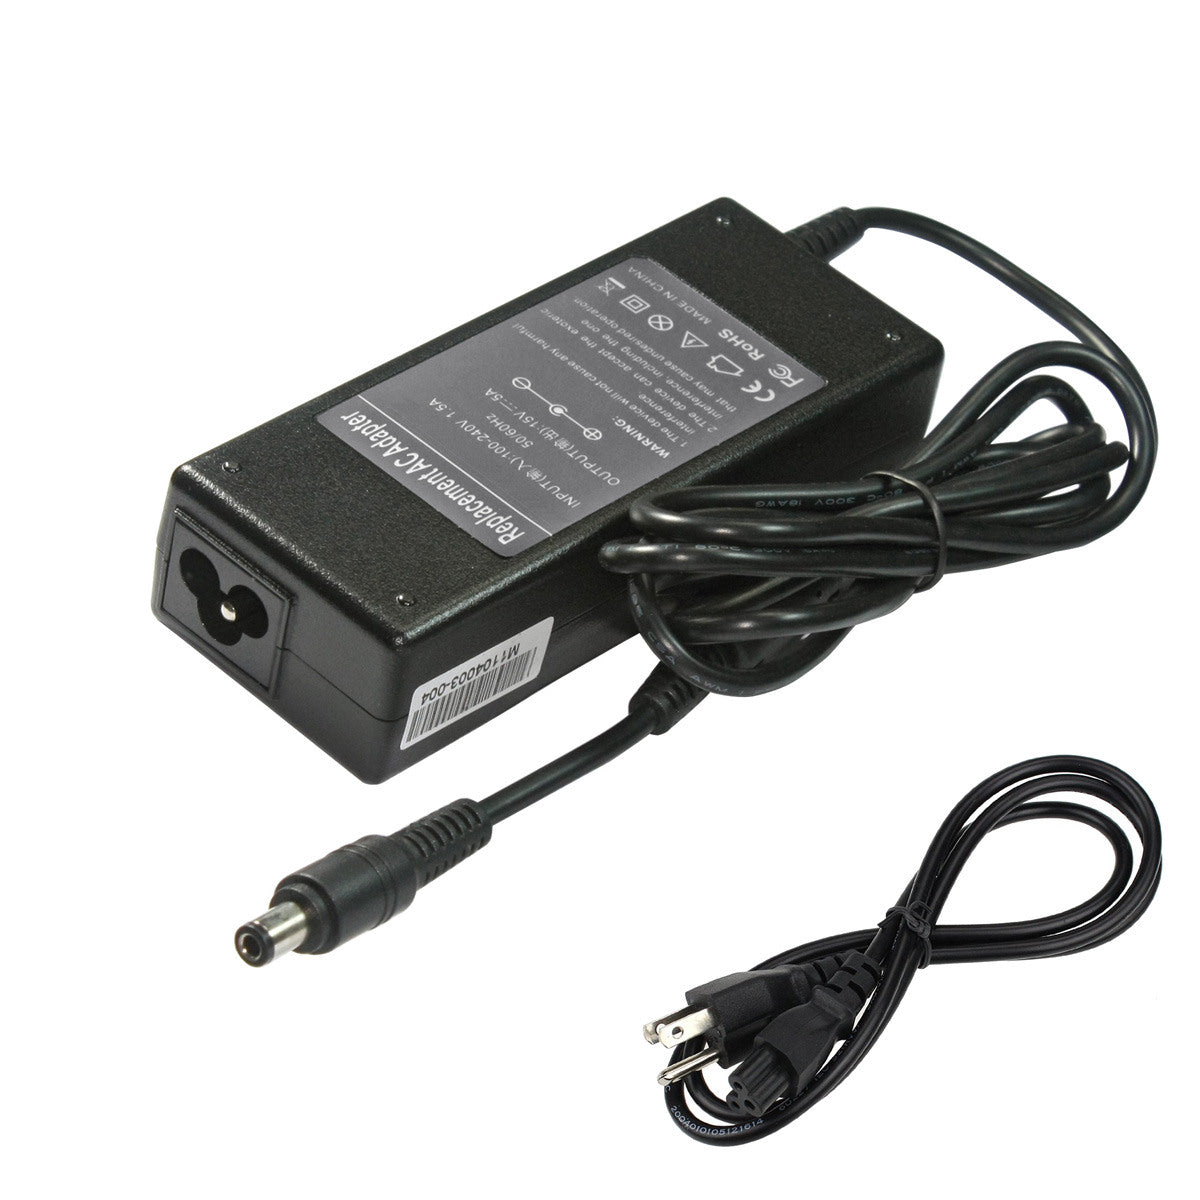 Compatible Replacement Toshiba Satellite PS267U-4K9J0K Laptop Charger.